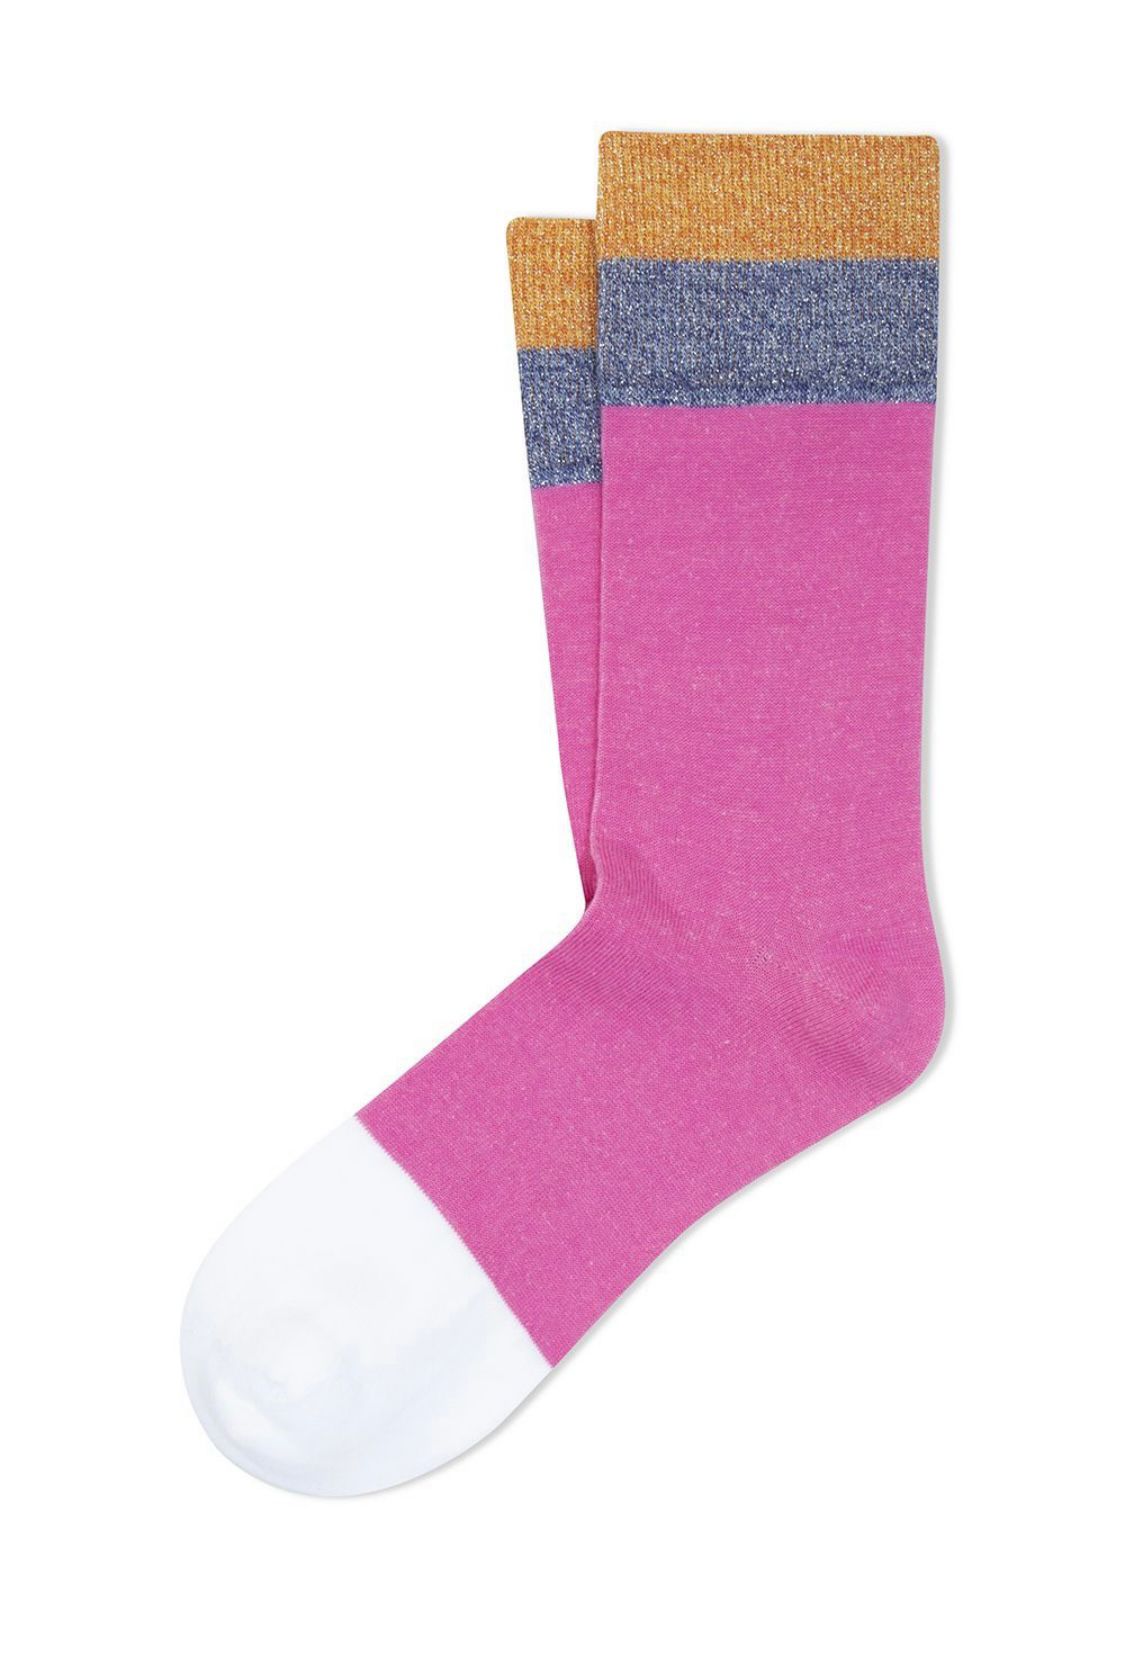 Ant45 Calcetines R81 Pink multicolor - The Class Room